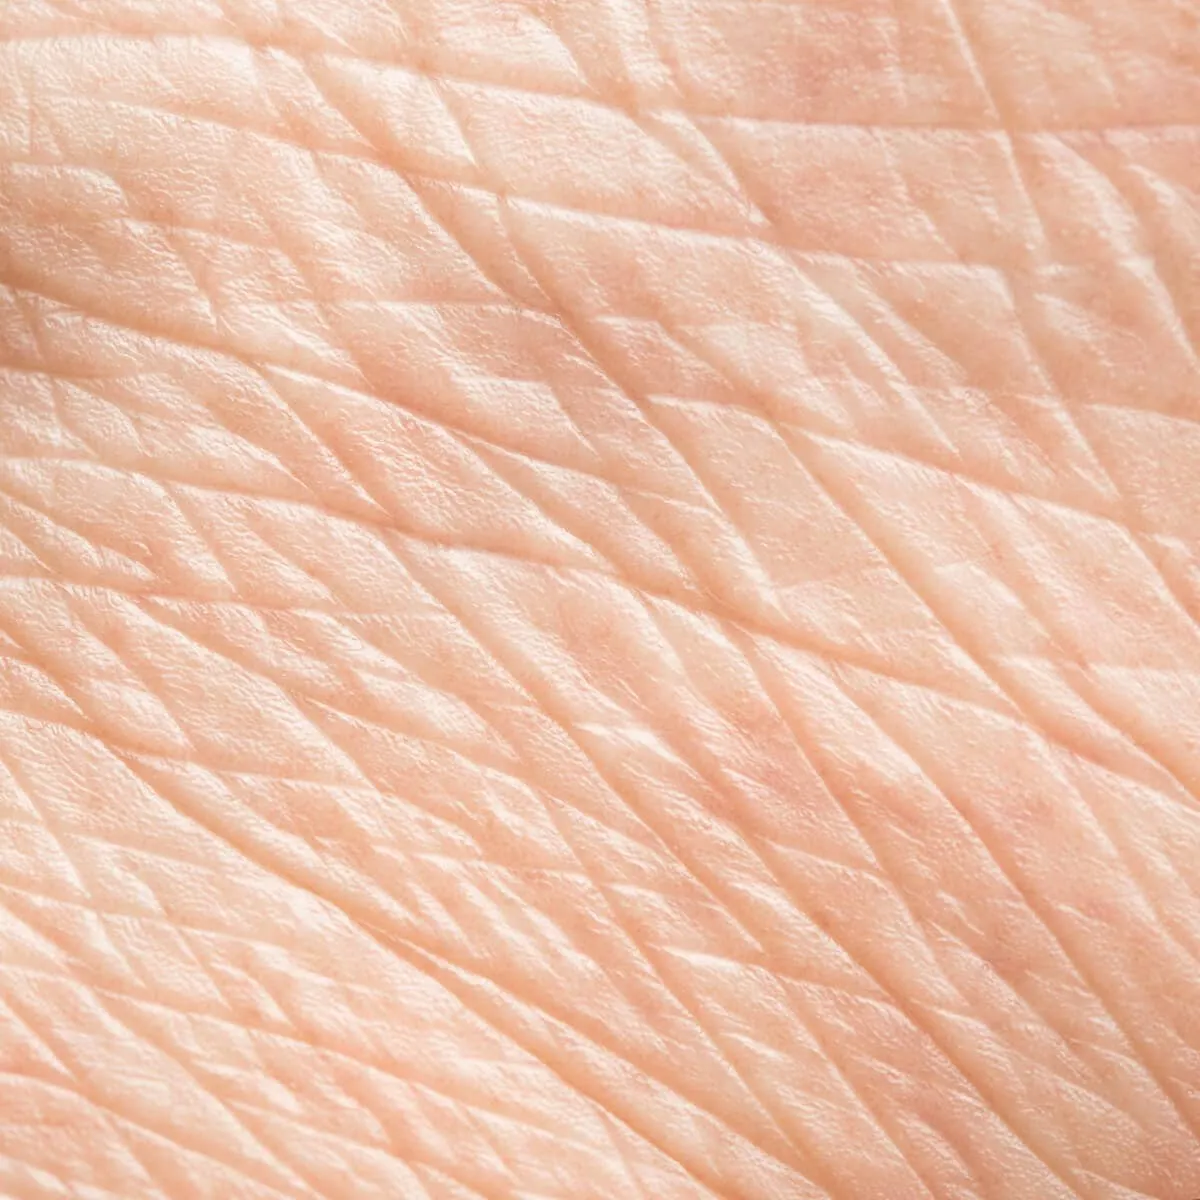 Anelastic skin with wrinkles